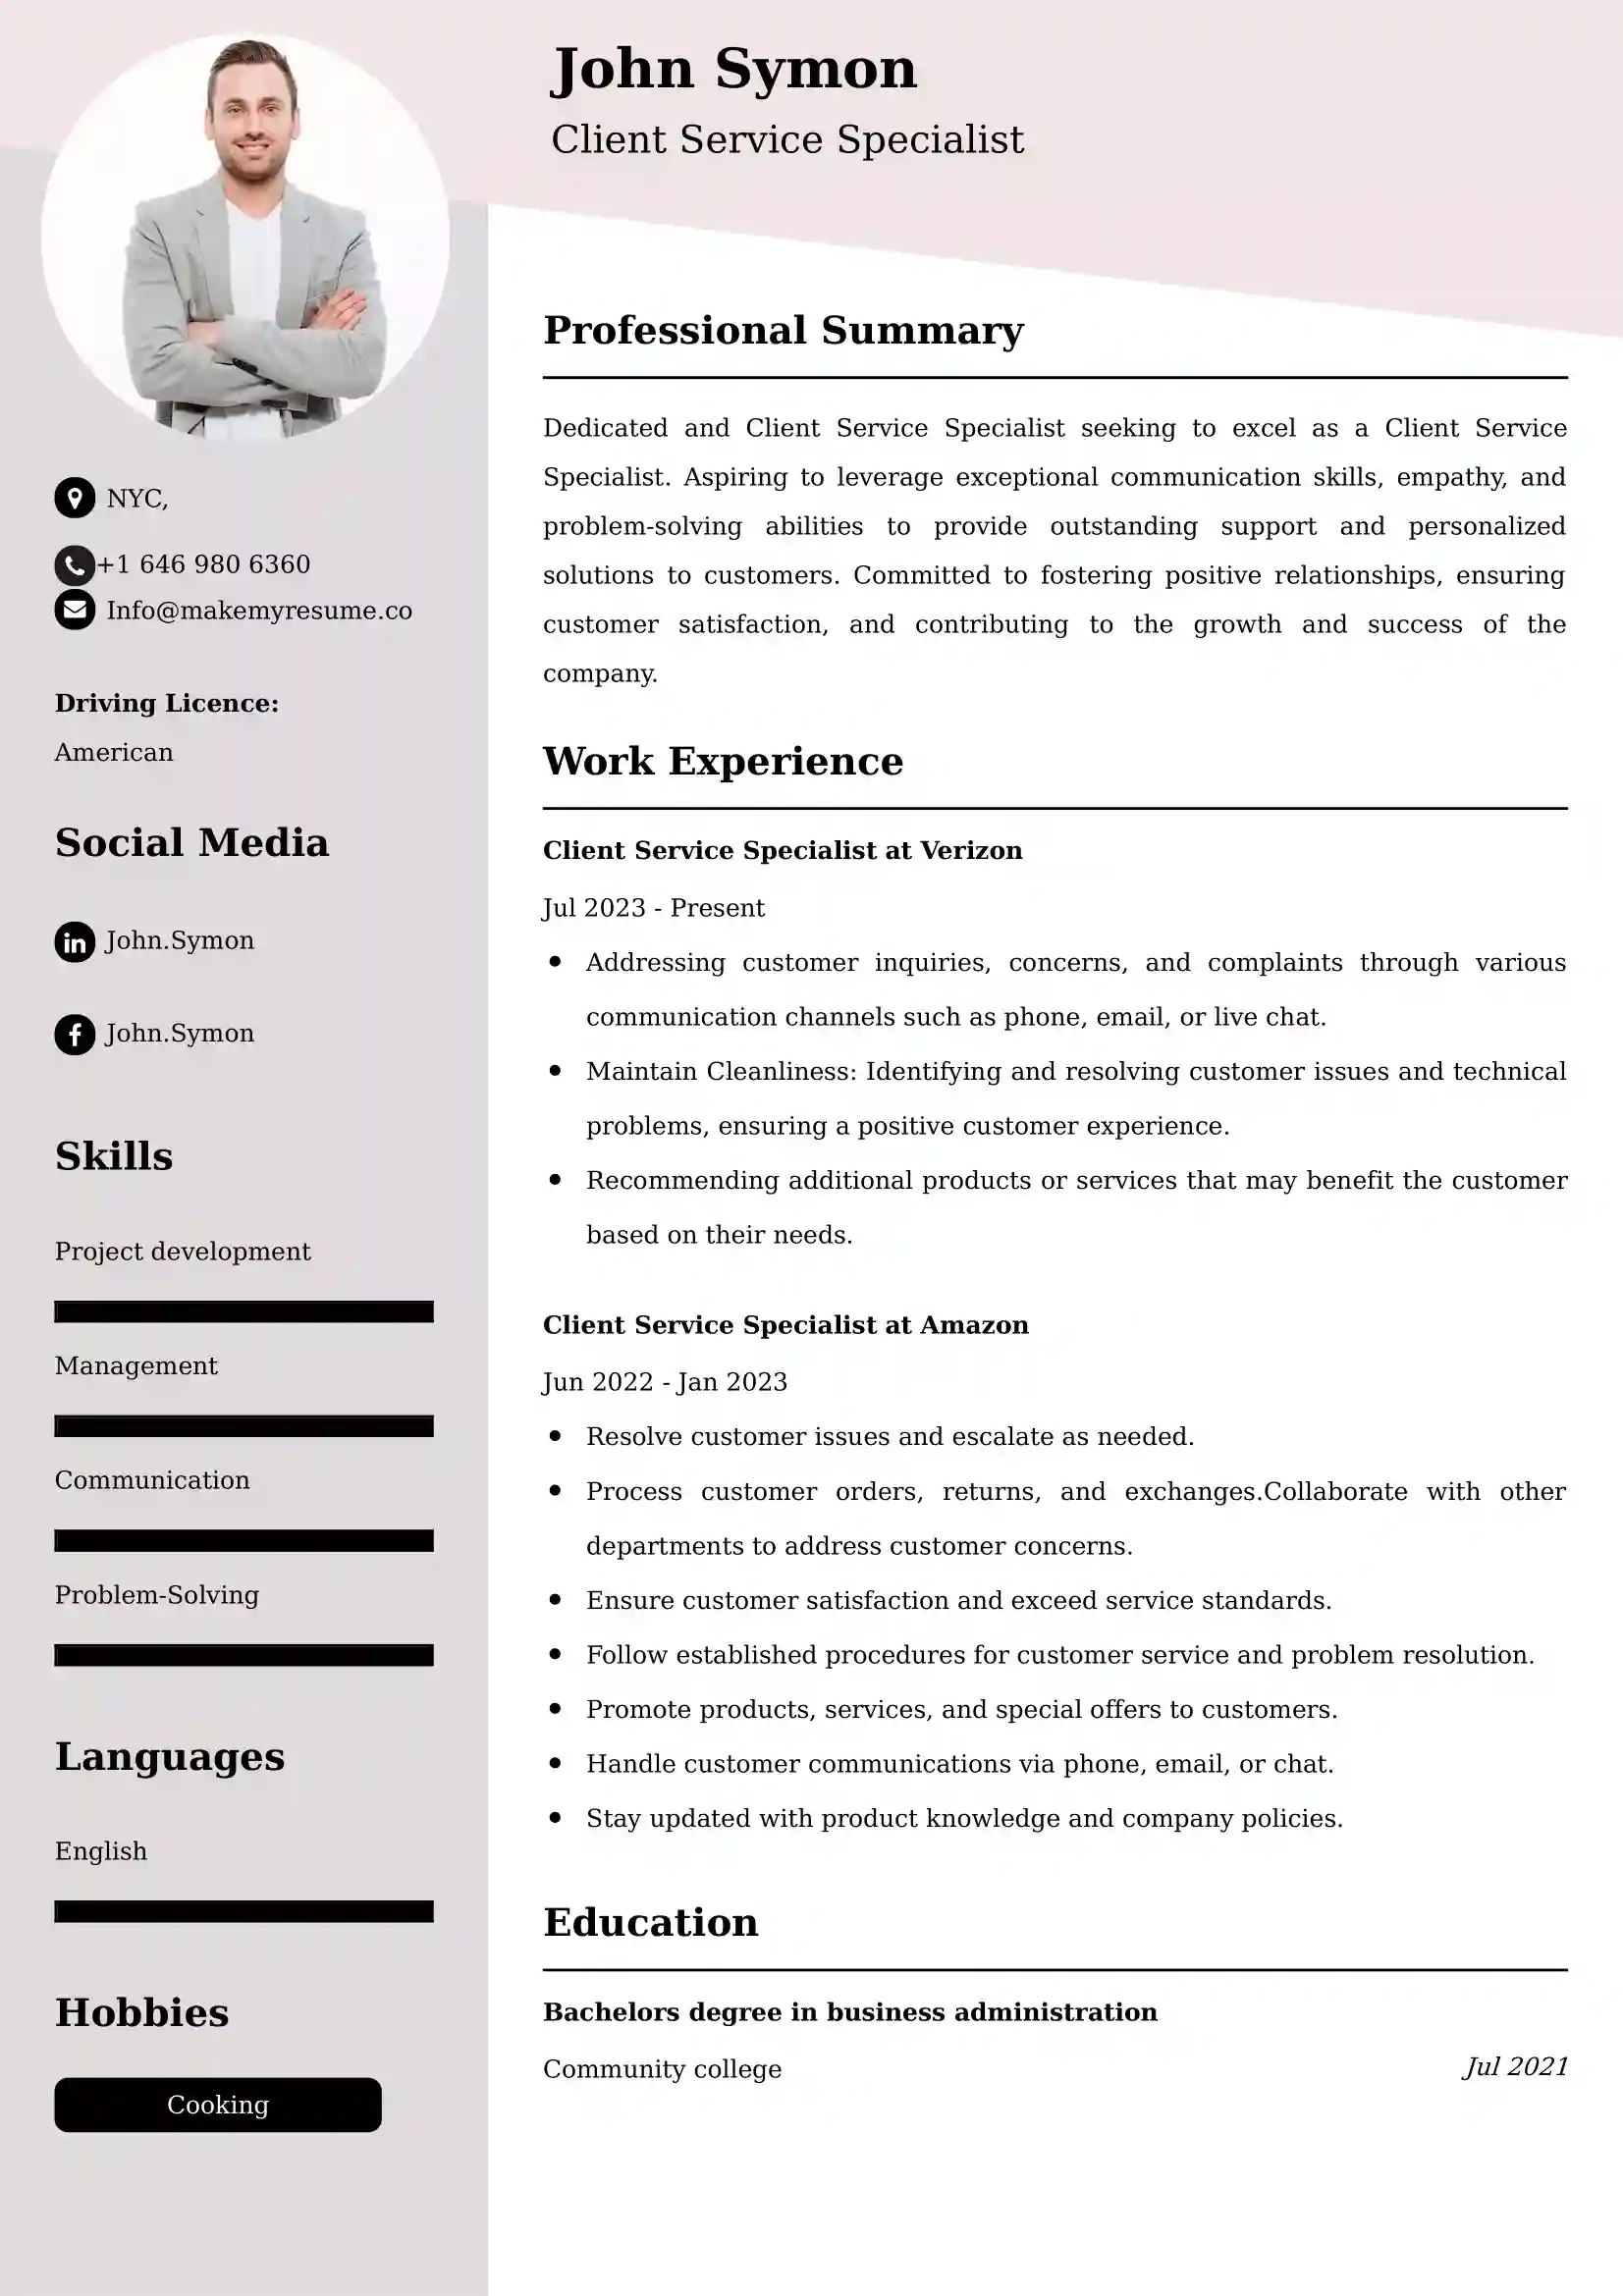 Client Service Specialist Resume Examples - Australian Format and Tips